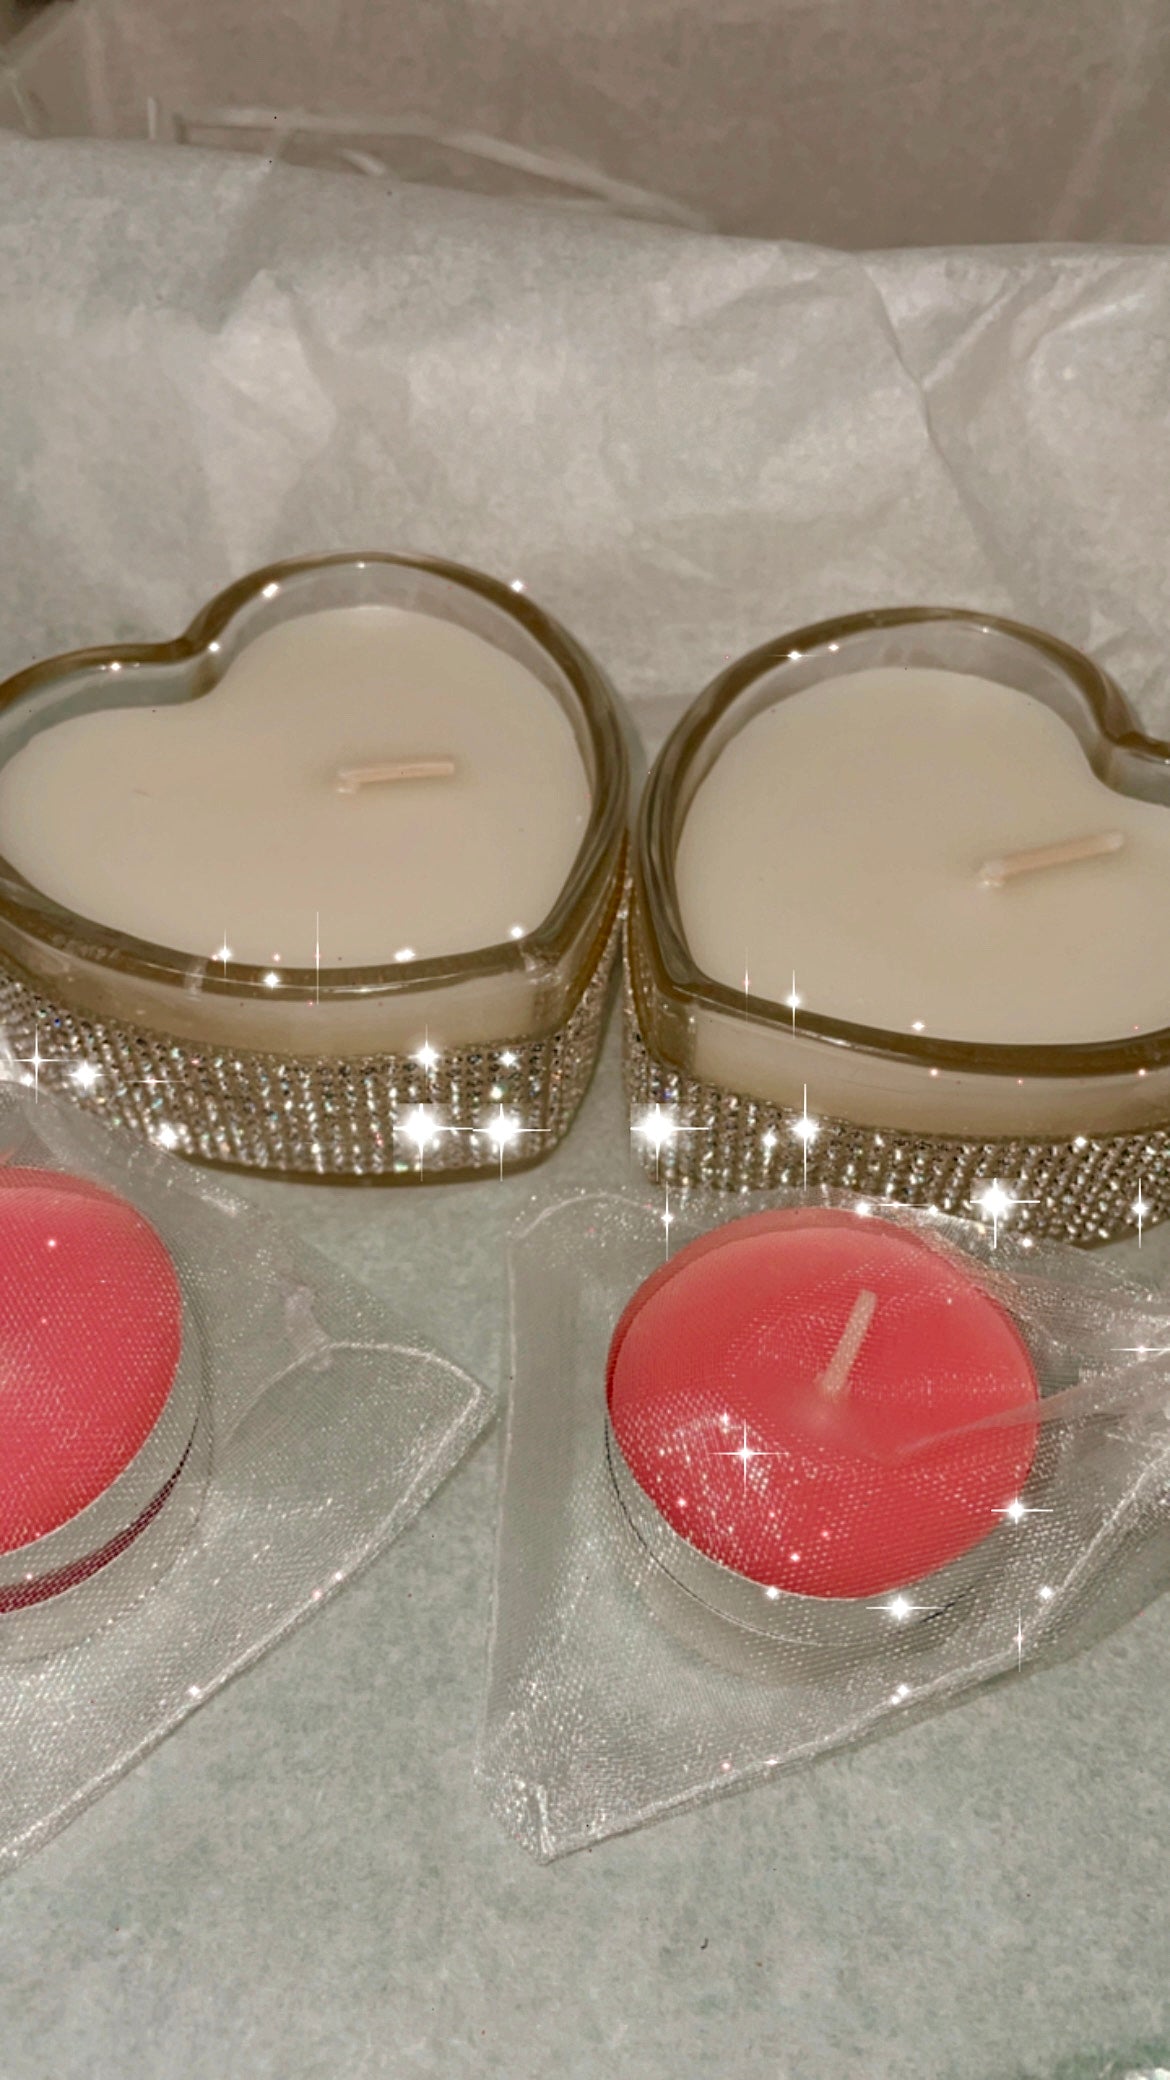 Bling candle gift set - vanilla scent